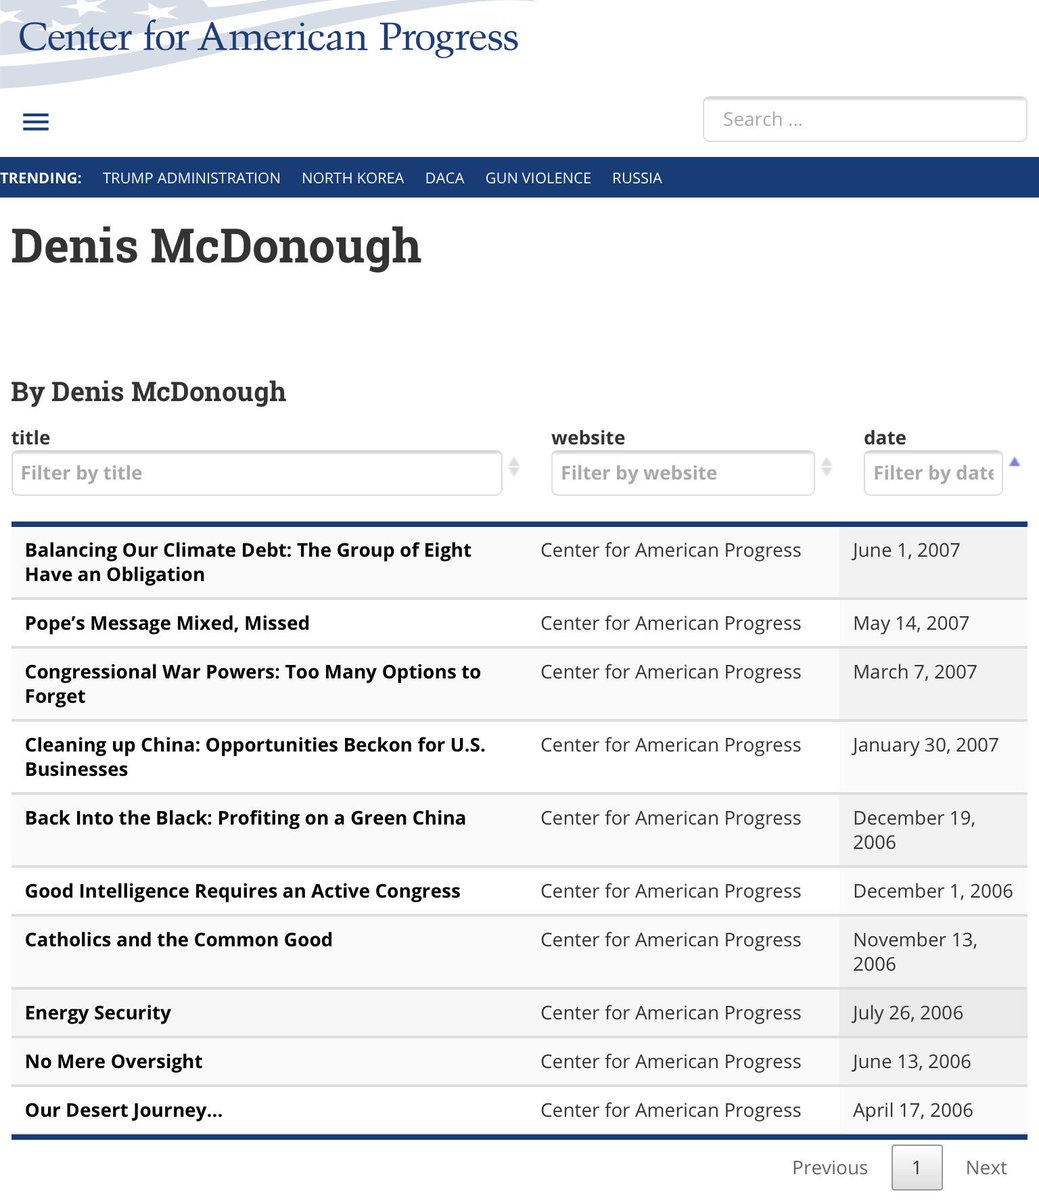 McDonough moved to the Center for American Progress, where he was a senior fellow focusing on foreign policy.  https://www.americanprogress.org/about/staff/mc-donough-denis/bio/ (hi  @johnpodesta )